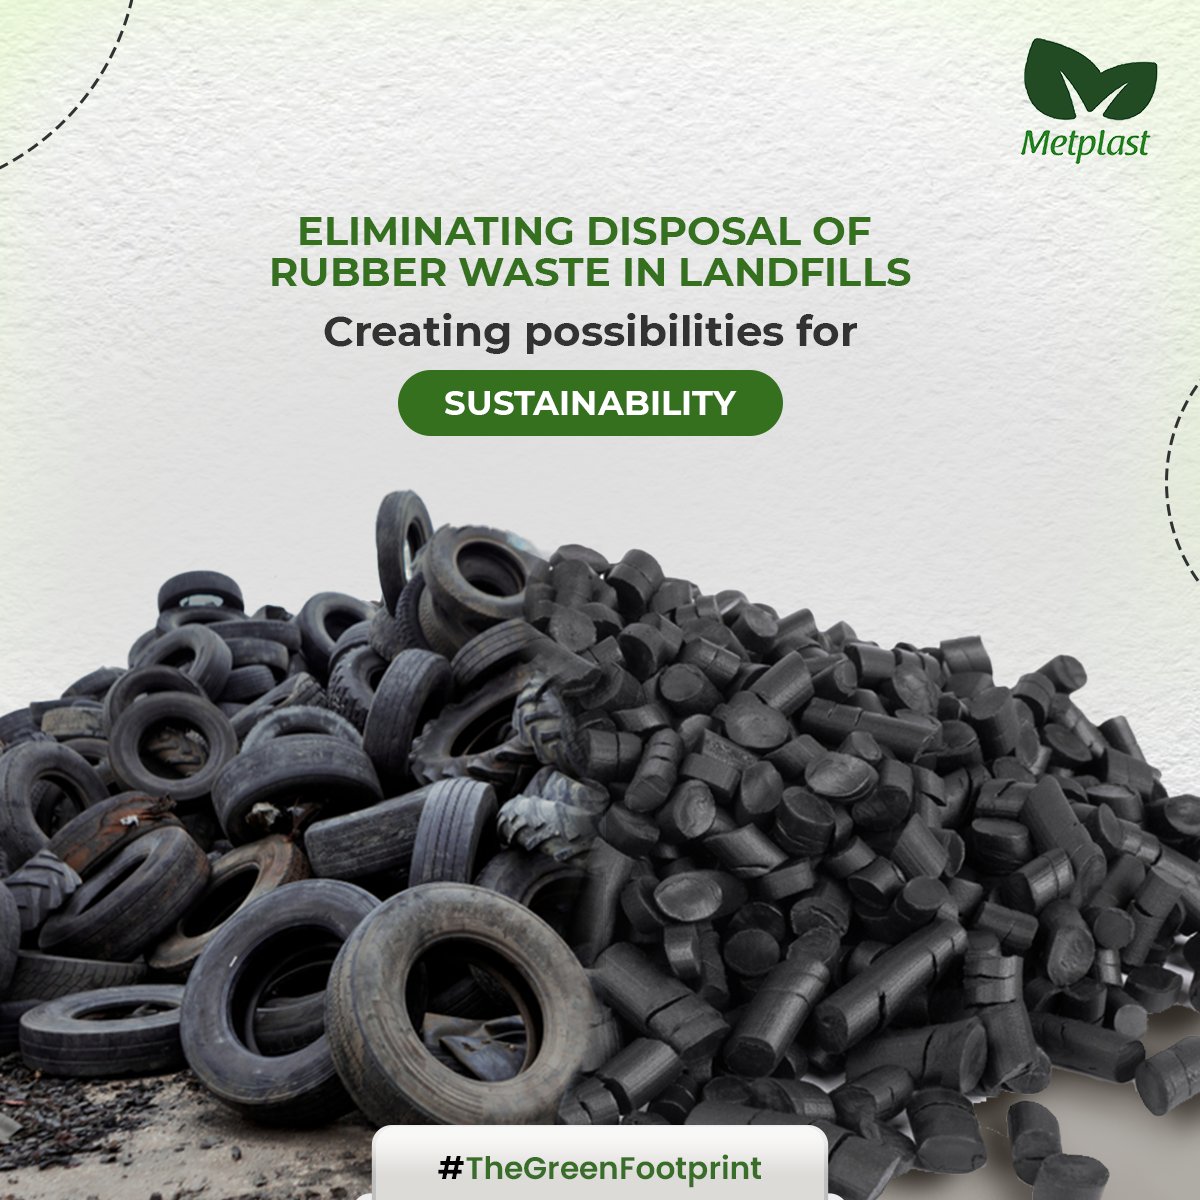 The environmental hazard posed by #RubberWaste flooding landfills is real. #Metplast helps to protect the environment by converting waste tyres into rubber products. Which can be used for a wide range of applications.

#ReduceReuseRecycle #TheGreenFootprint #TyreRecycling